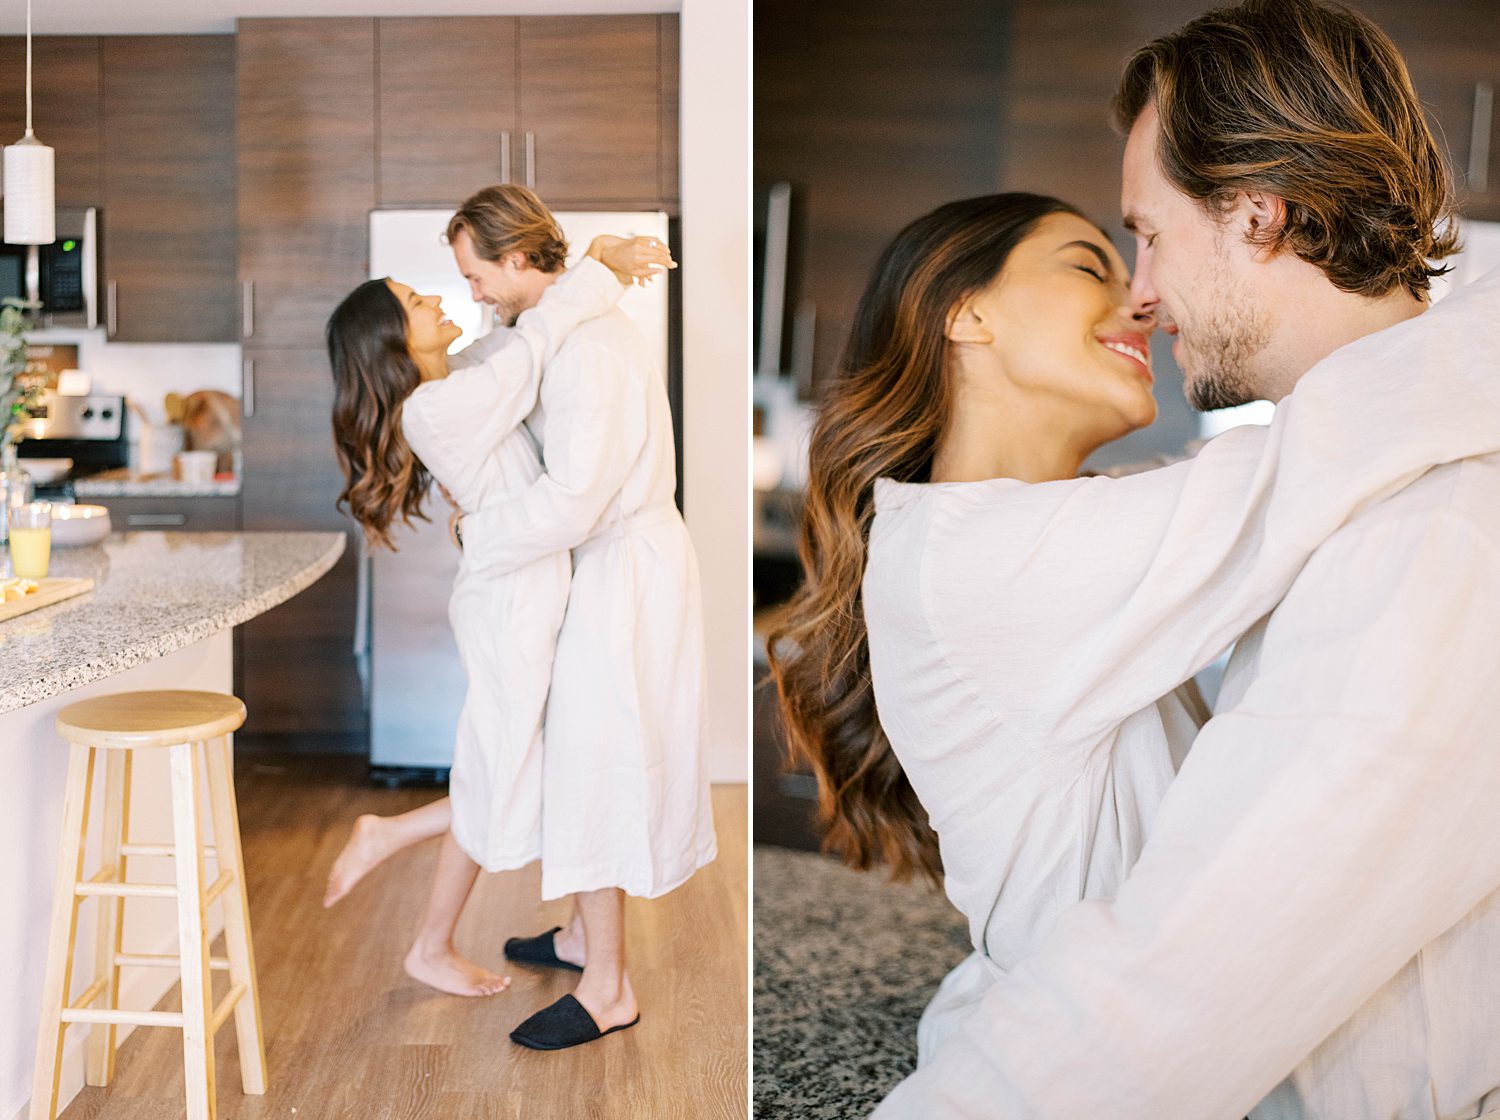 woman leans to kiss husband while wearing robes dancing in kitchen